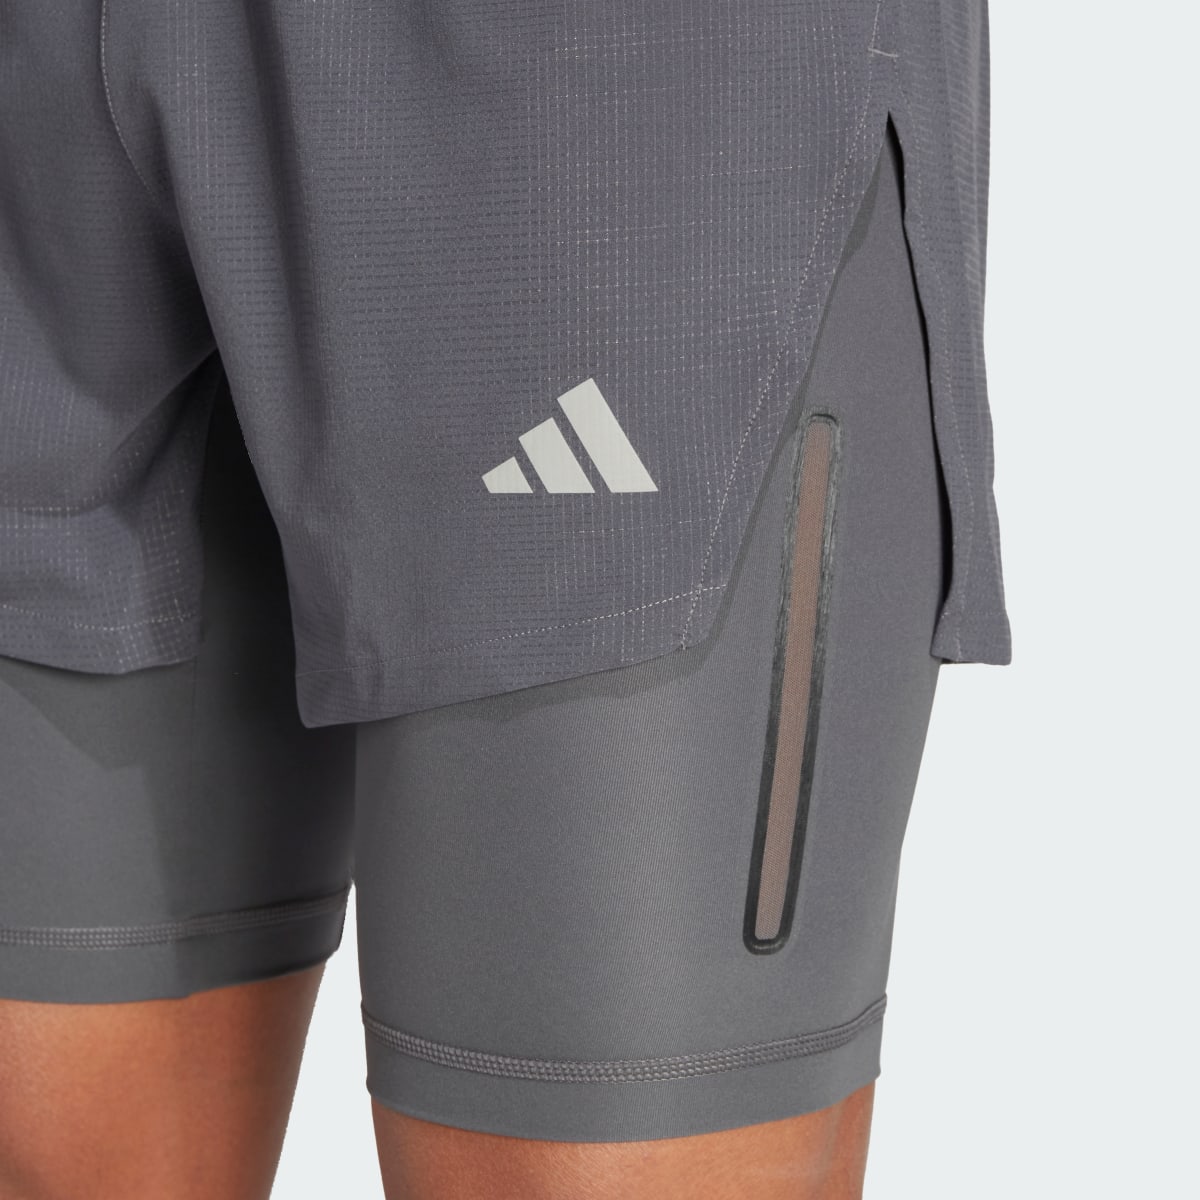 Adidas HEAT.RDY HIIT Elevated Training 2-in-1 Shorts. 6